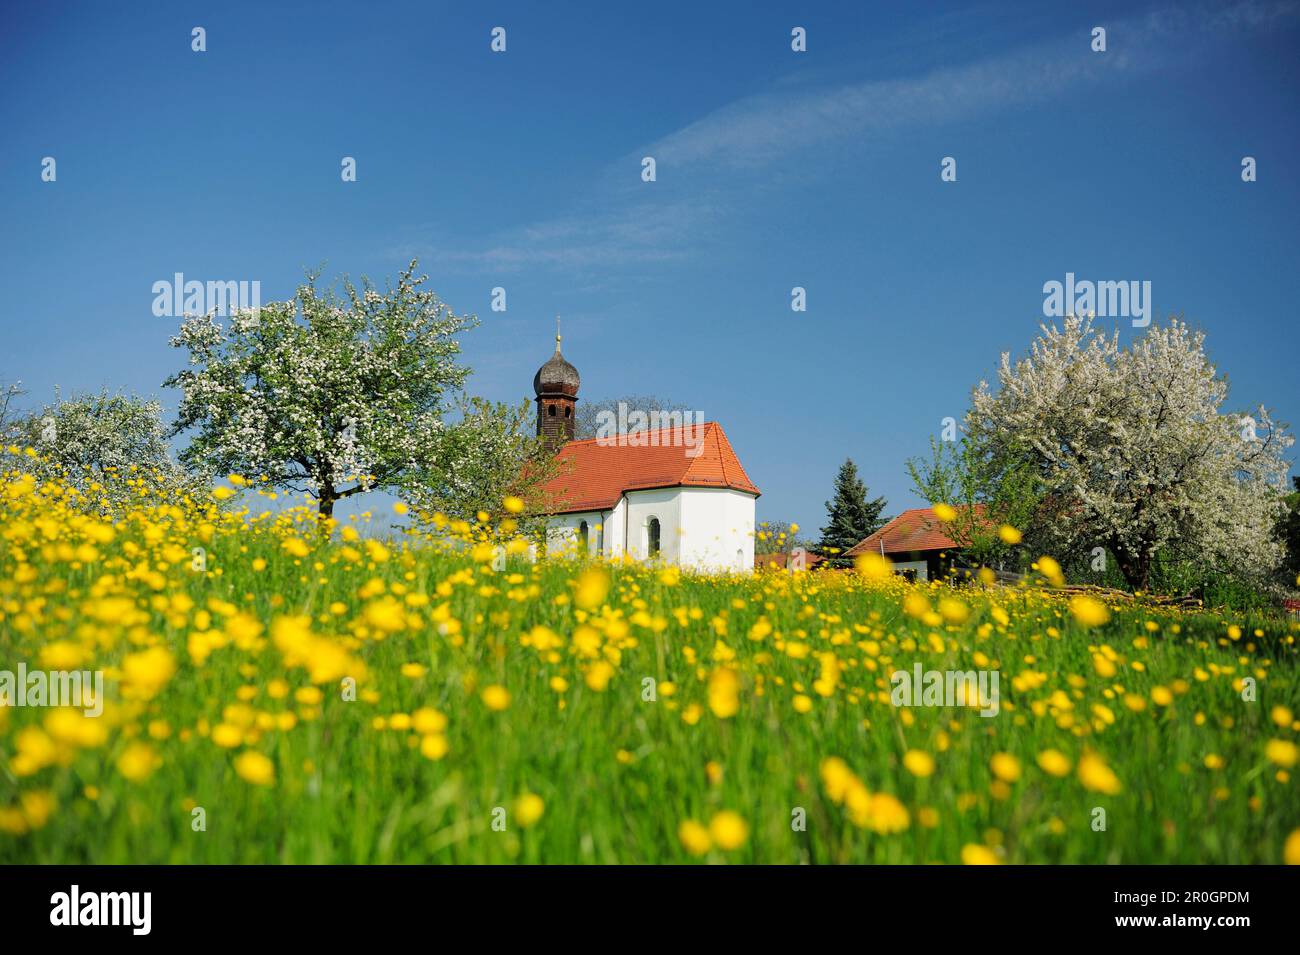 Chapel on flower meadow with fruit trees in blossom, Upper Bavaria, Bavaria, Germany Stock Photo